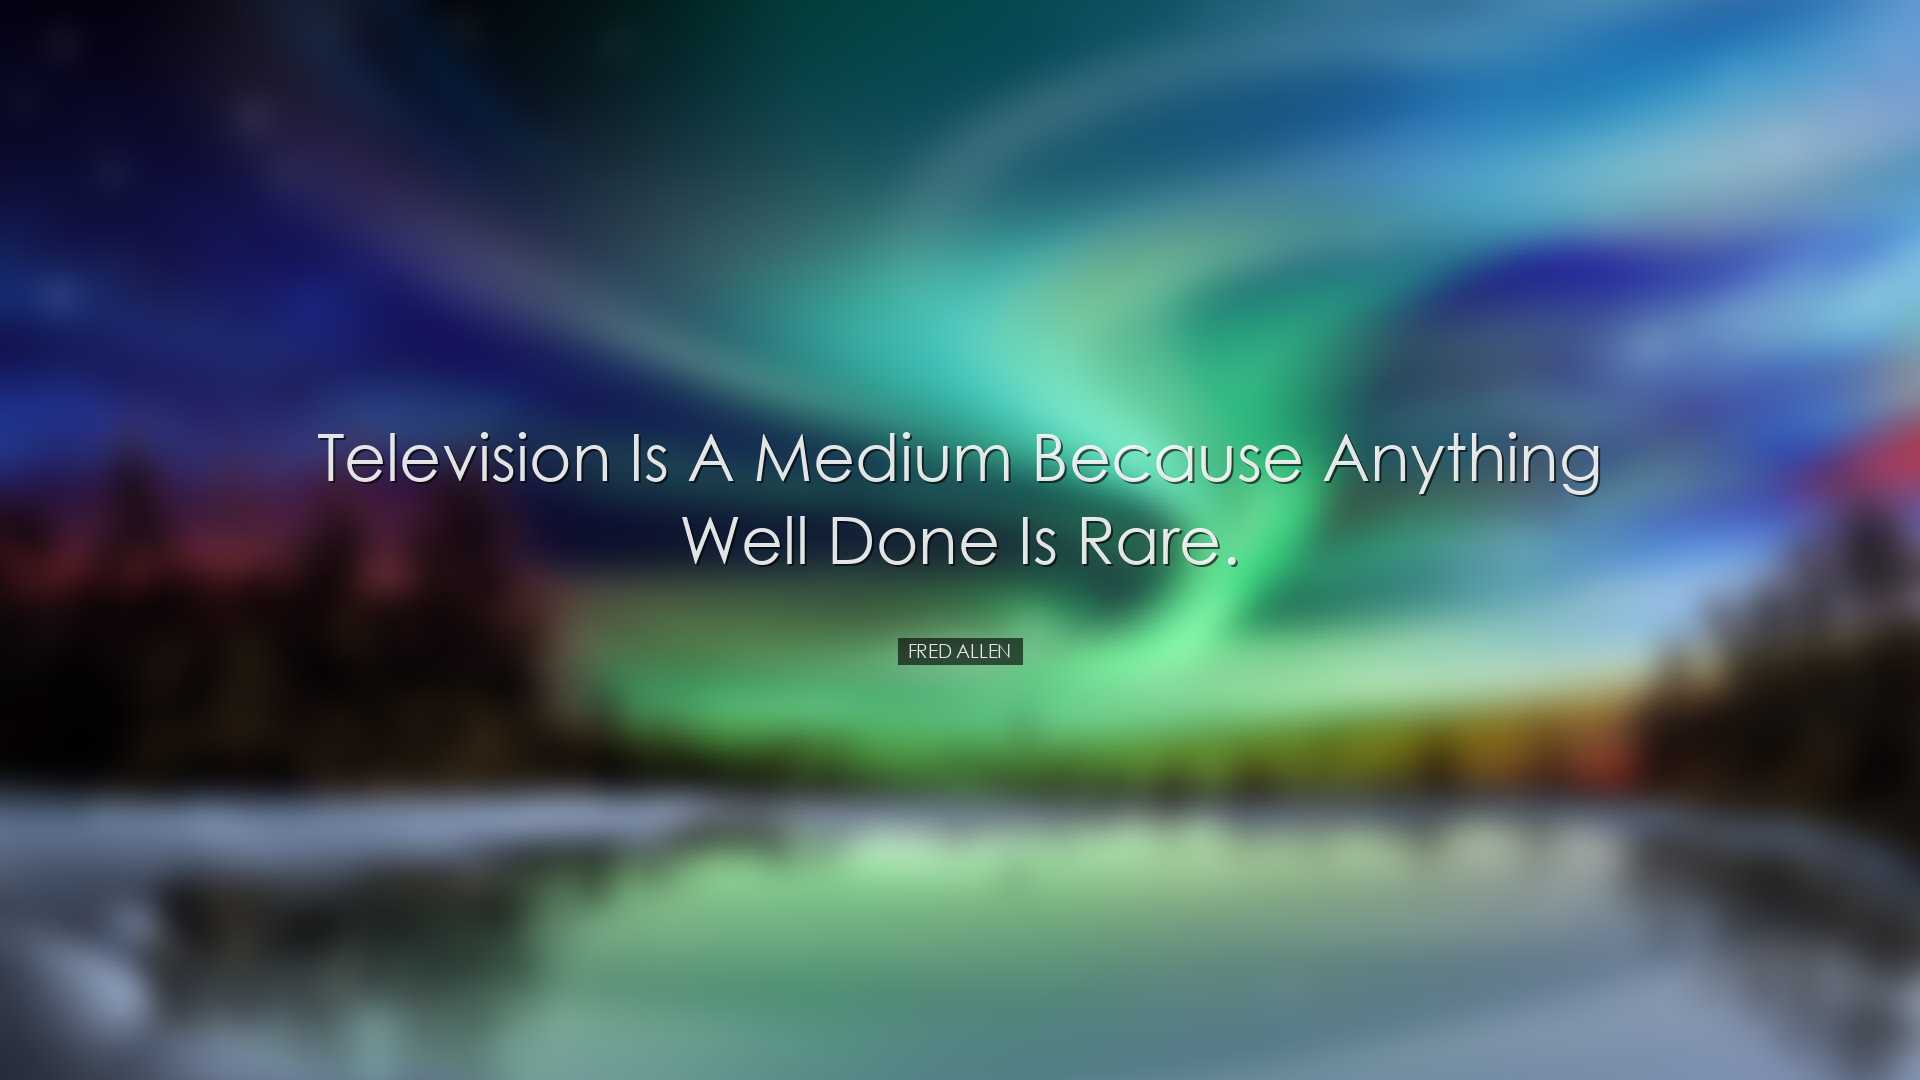 Television is a medium because anything well done is rare. - Fred